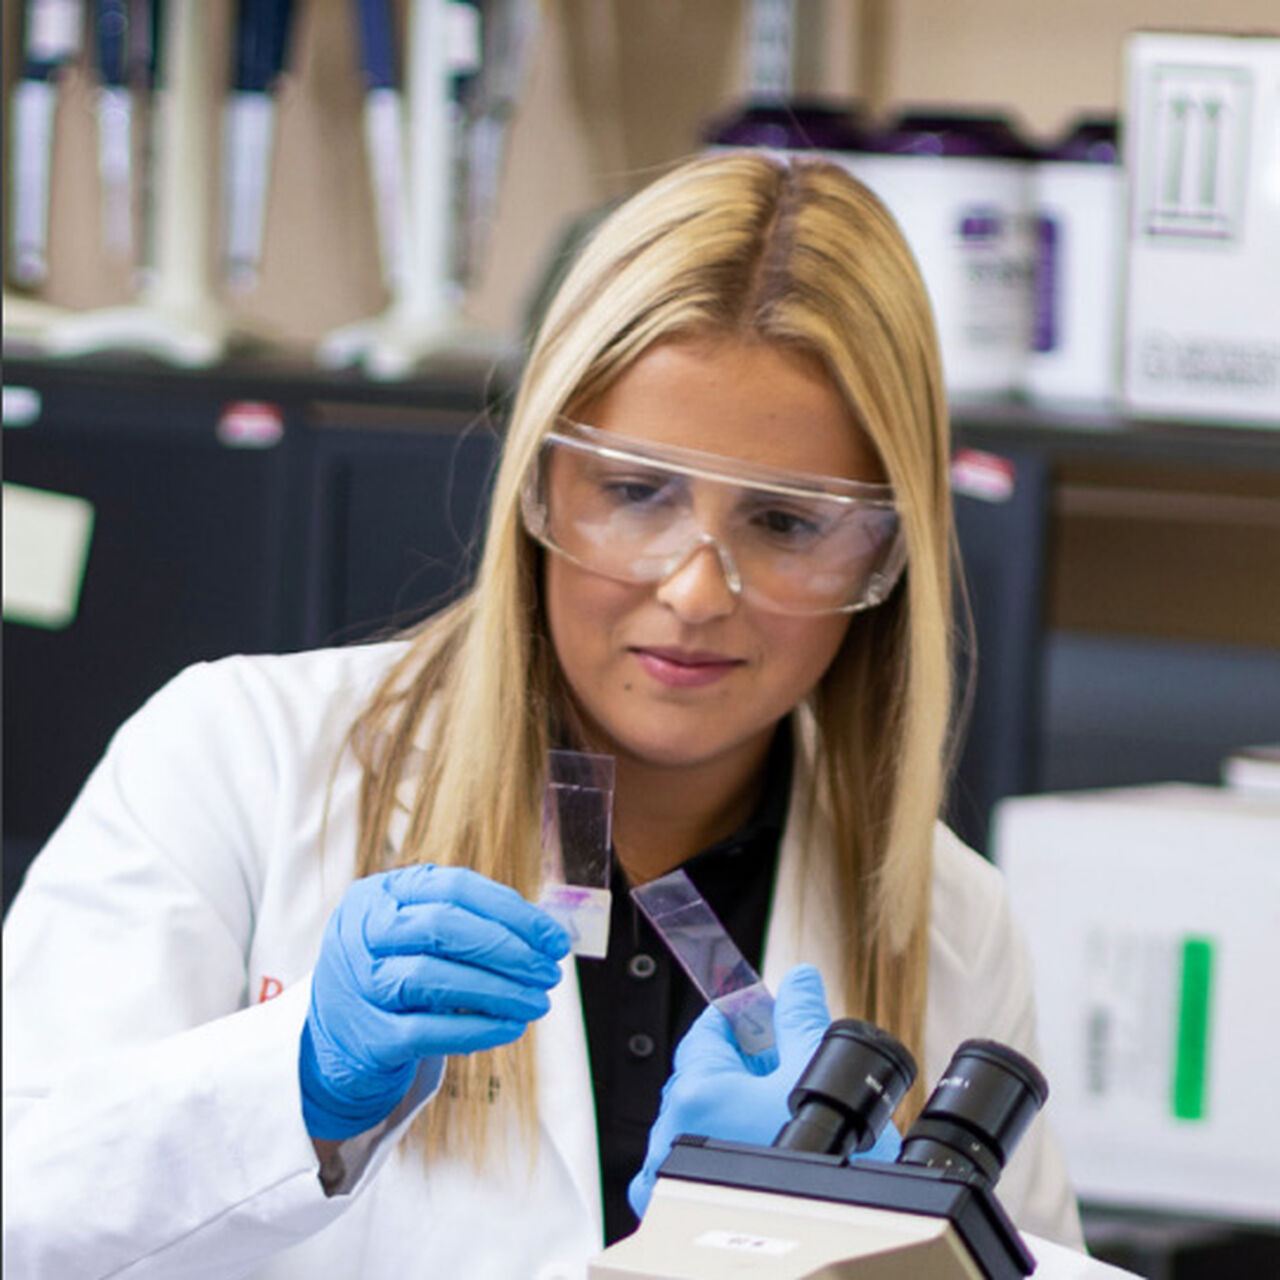 Researcher working in lab image number 0